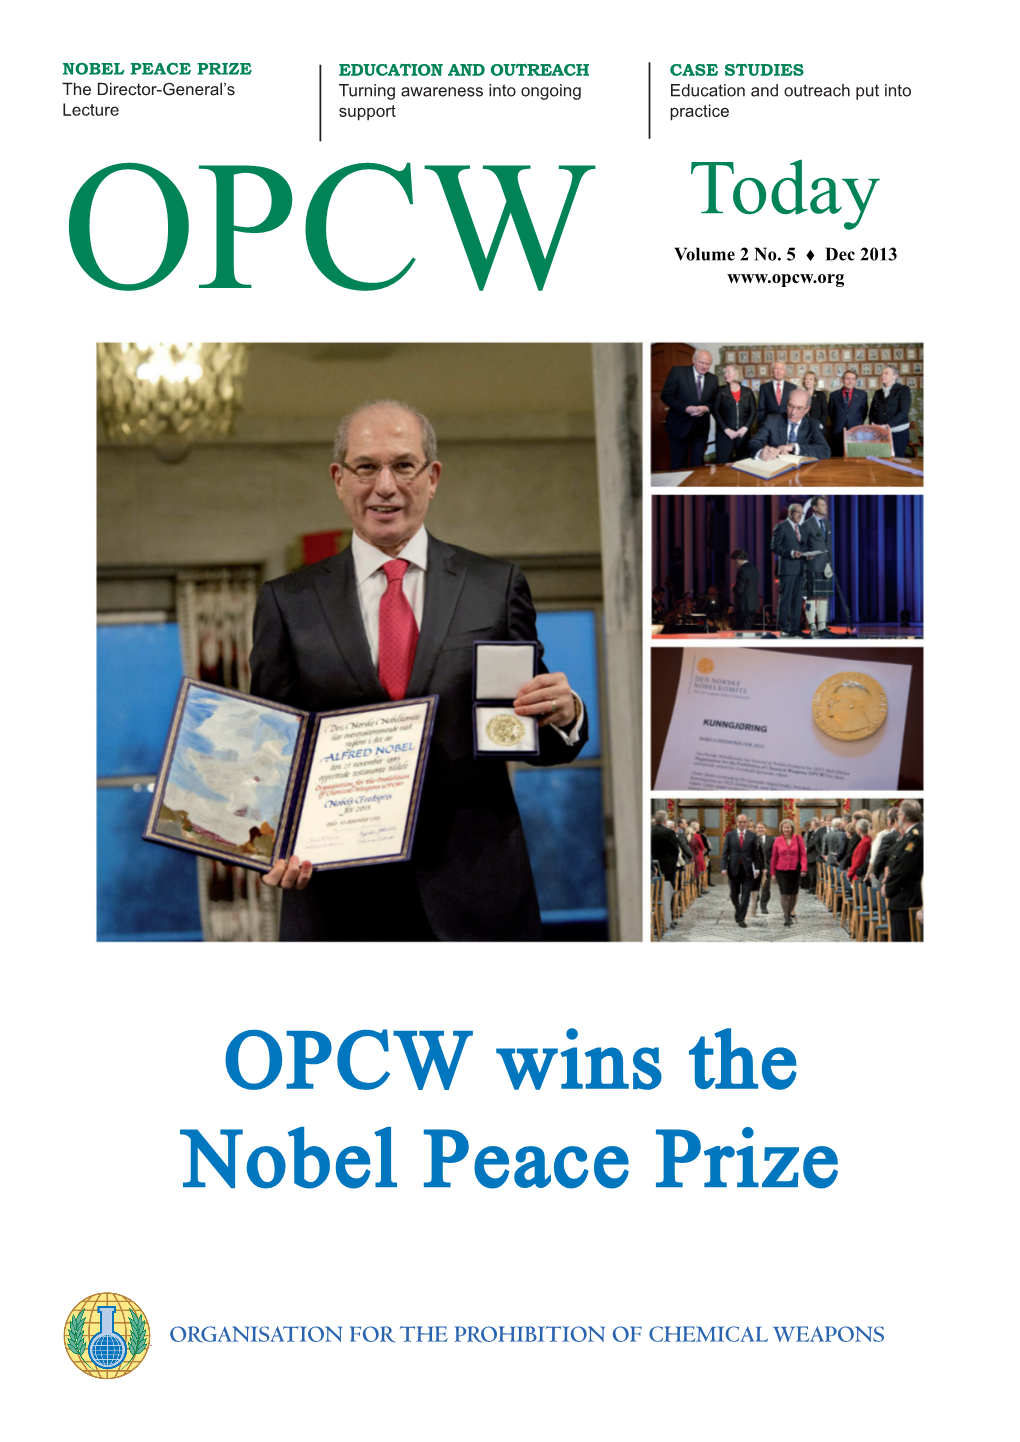 OPCW Wins the Nobel Peace Prize